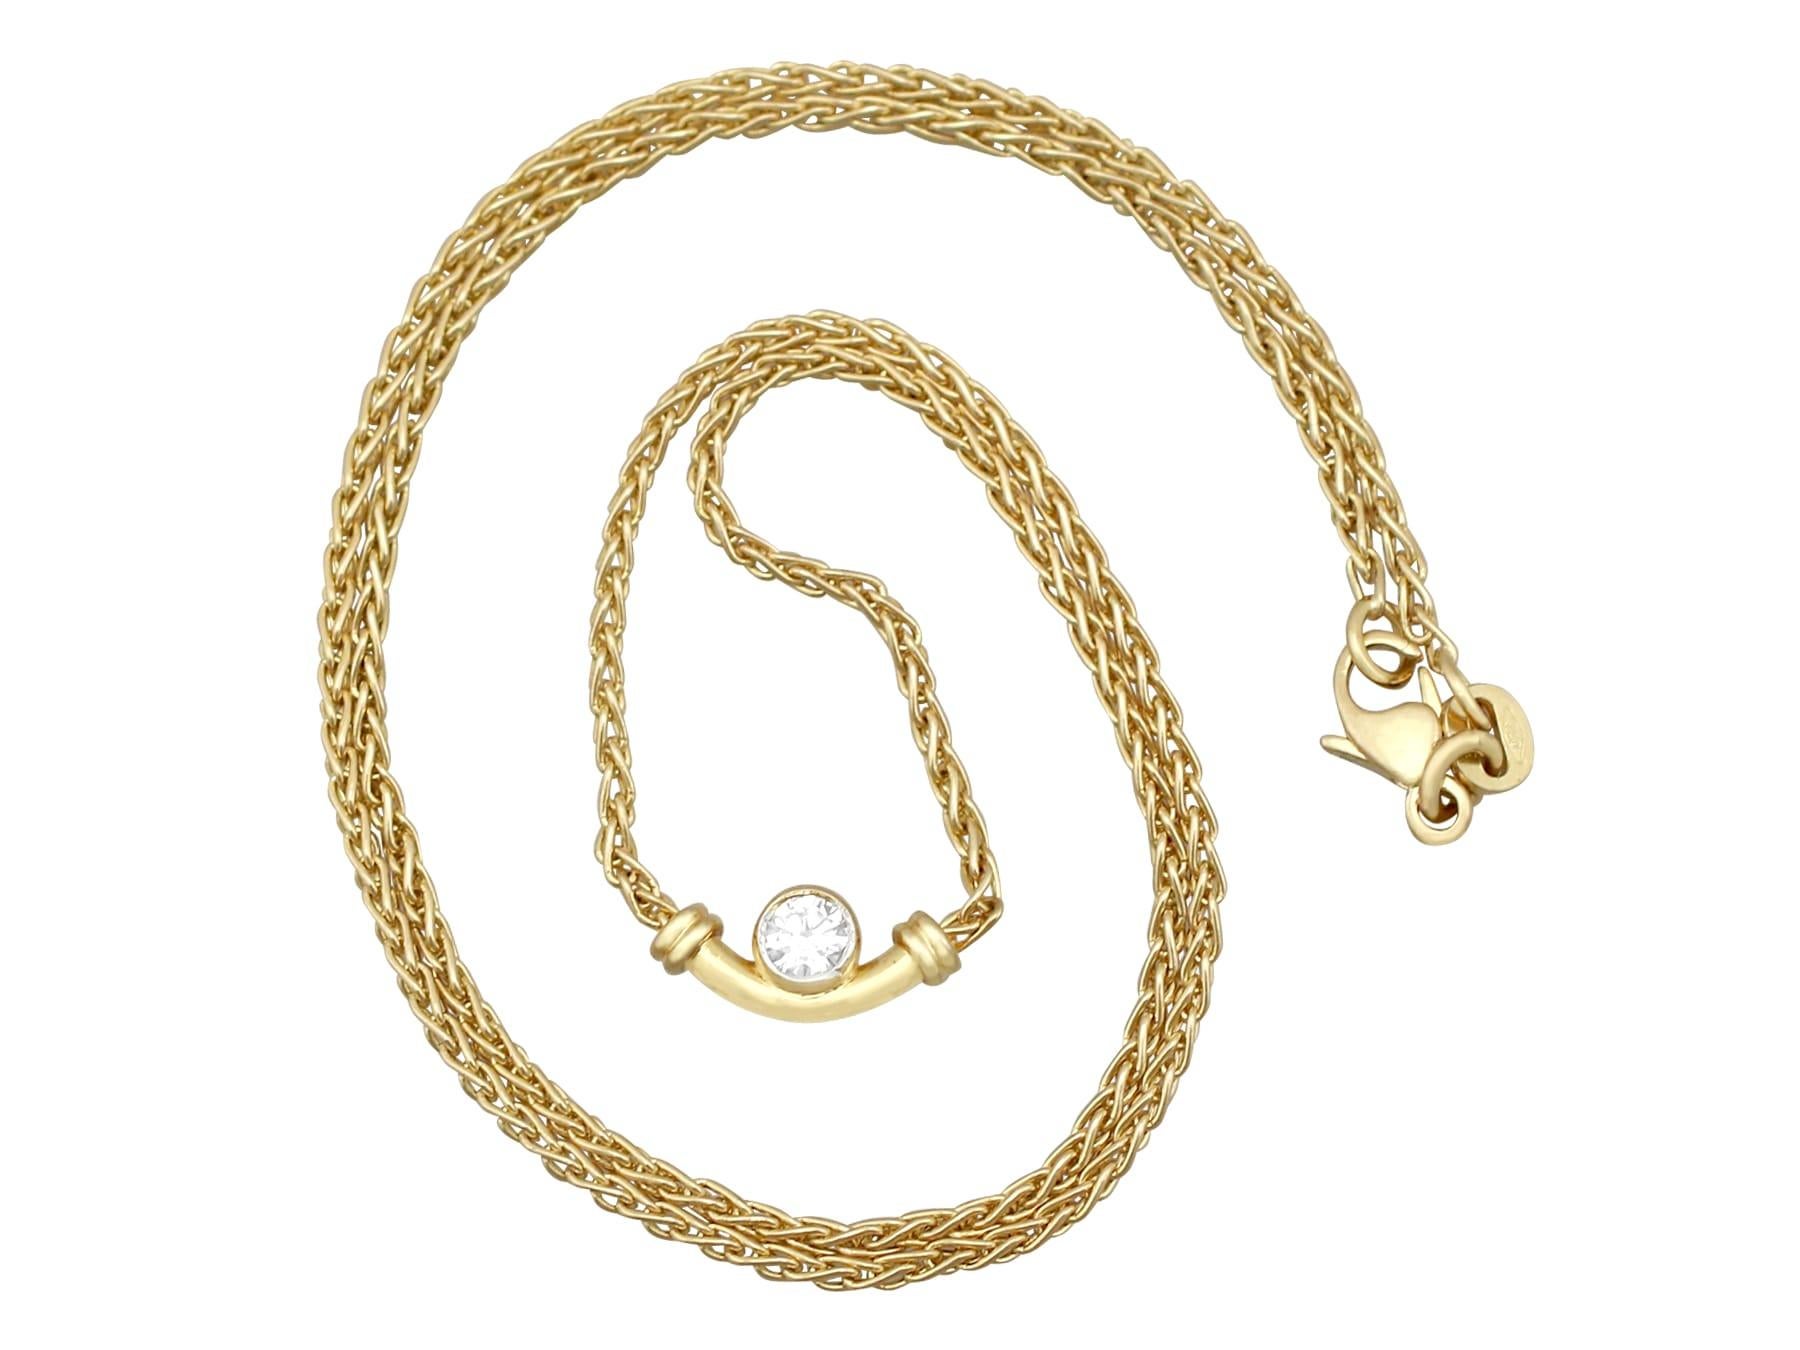 An impressive vintage 0.17 carat diamond and 18 karat yellow gold necklace; part of our diverse diamond jewelry and estate jewelry collections.

This fine and impressive diamond pendant has been crafted in 18k yellow gold.

The curbed tubular